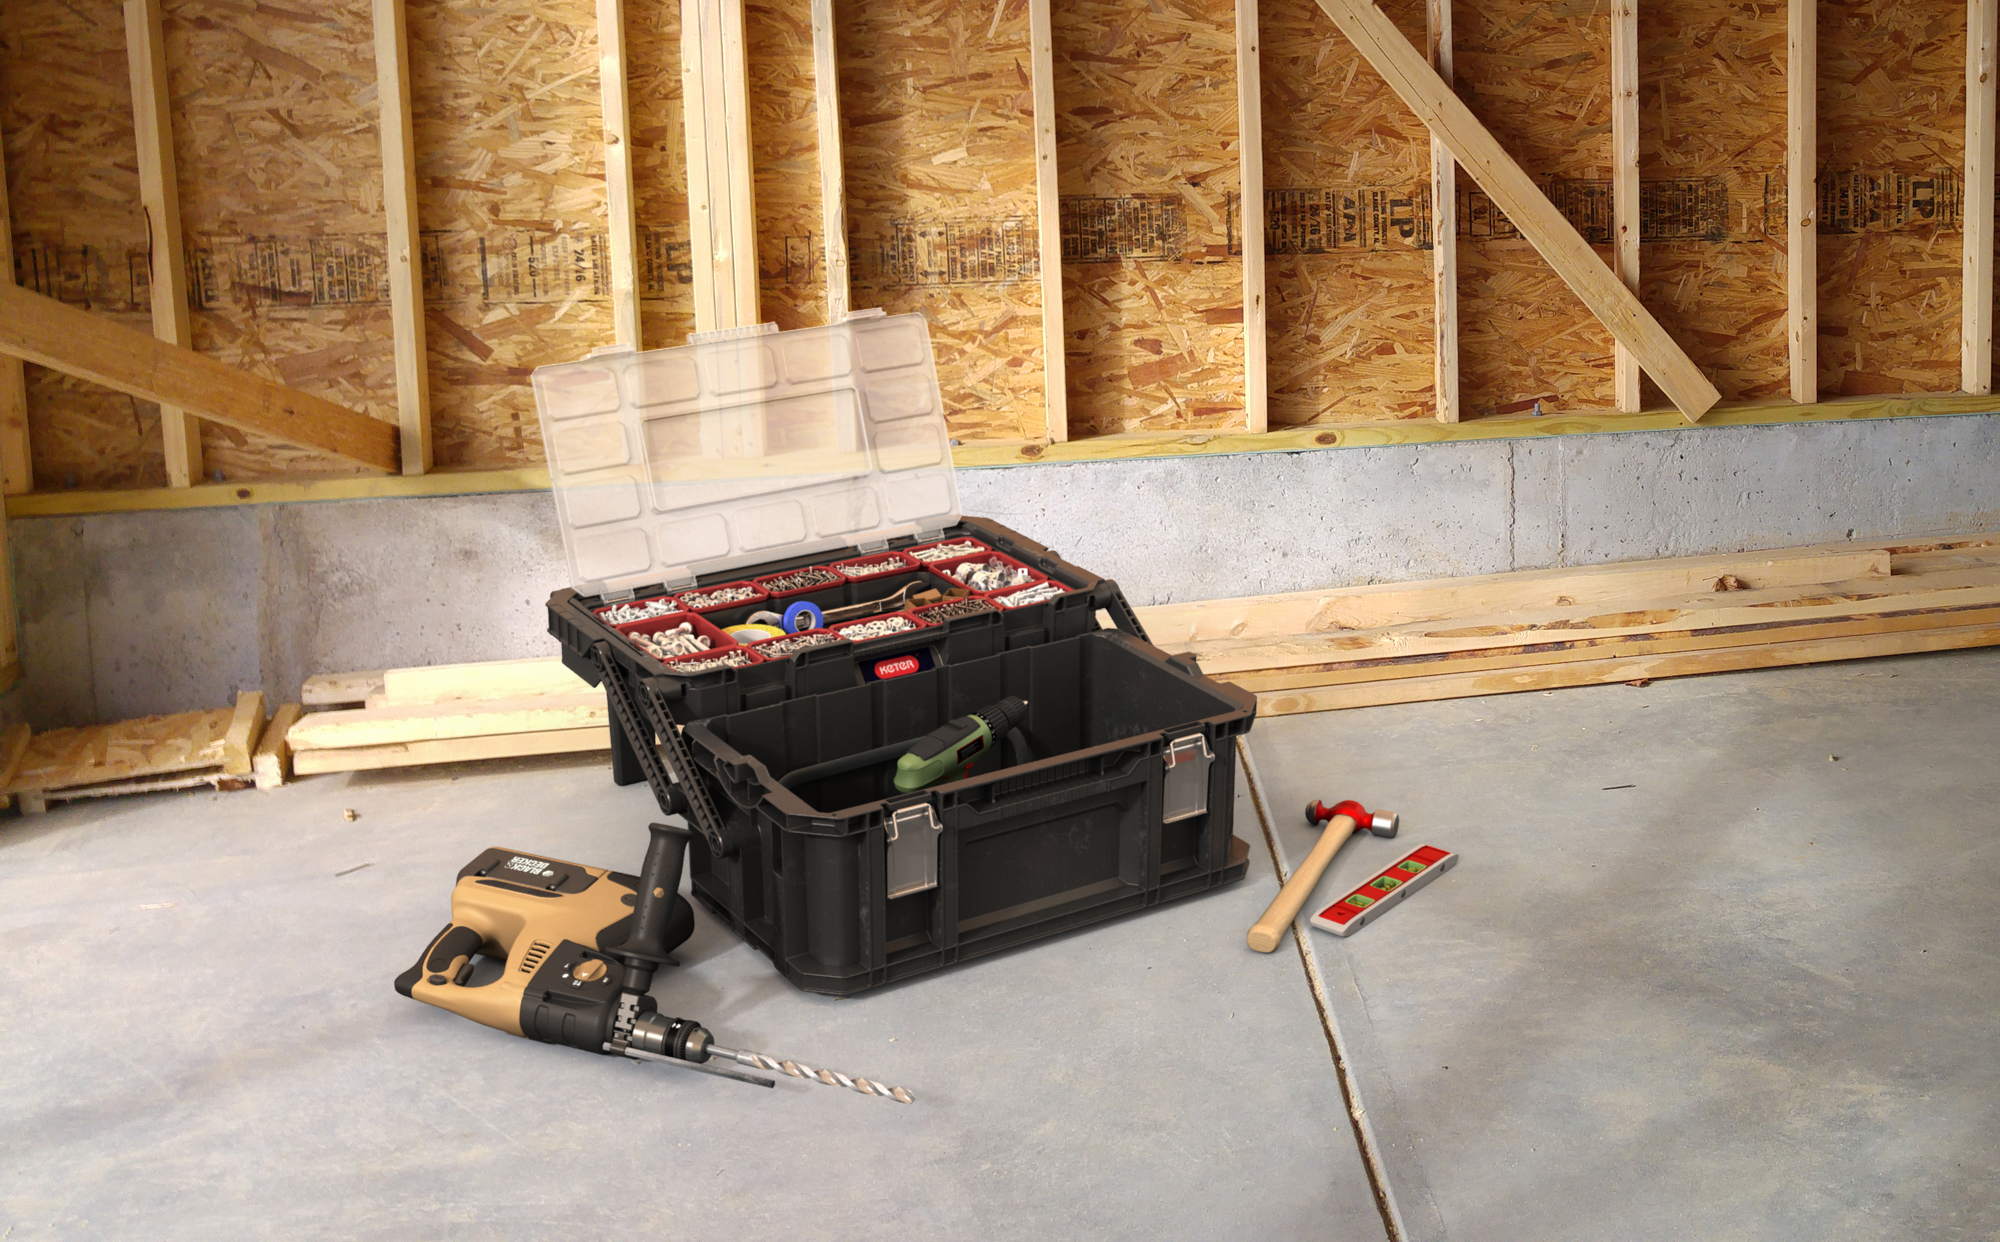 KETER CONNECT CANTI TOOL BOX